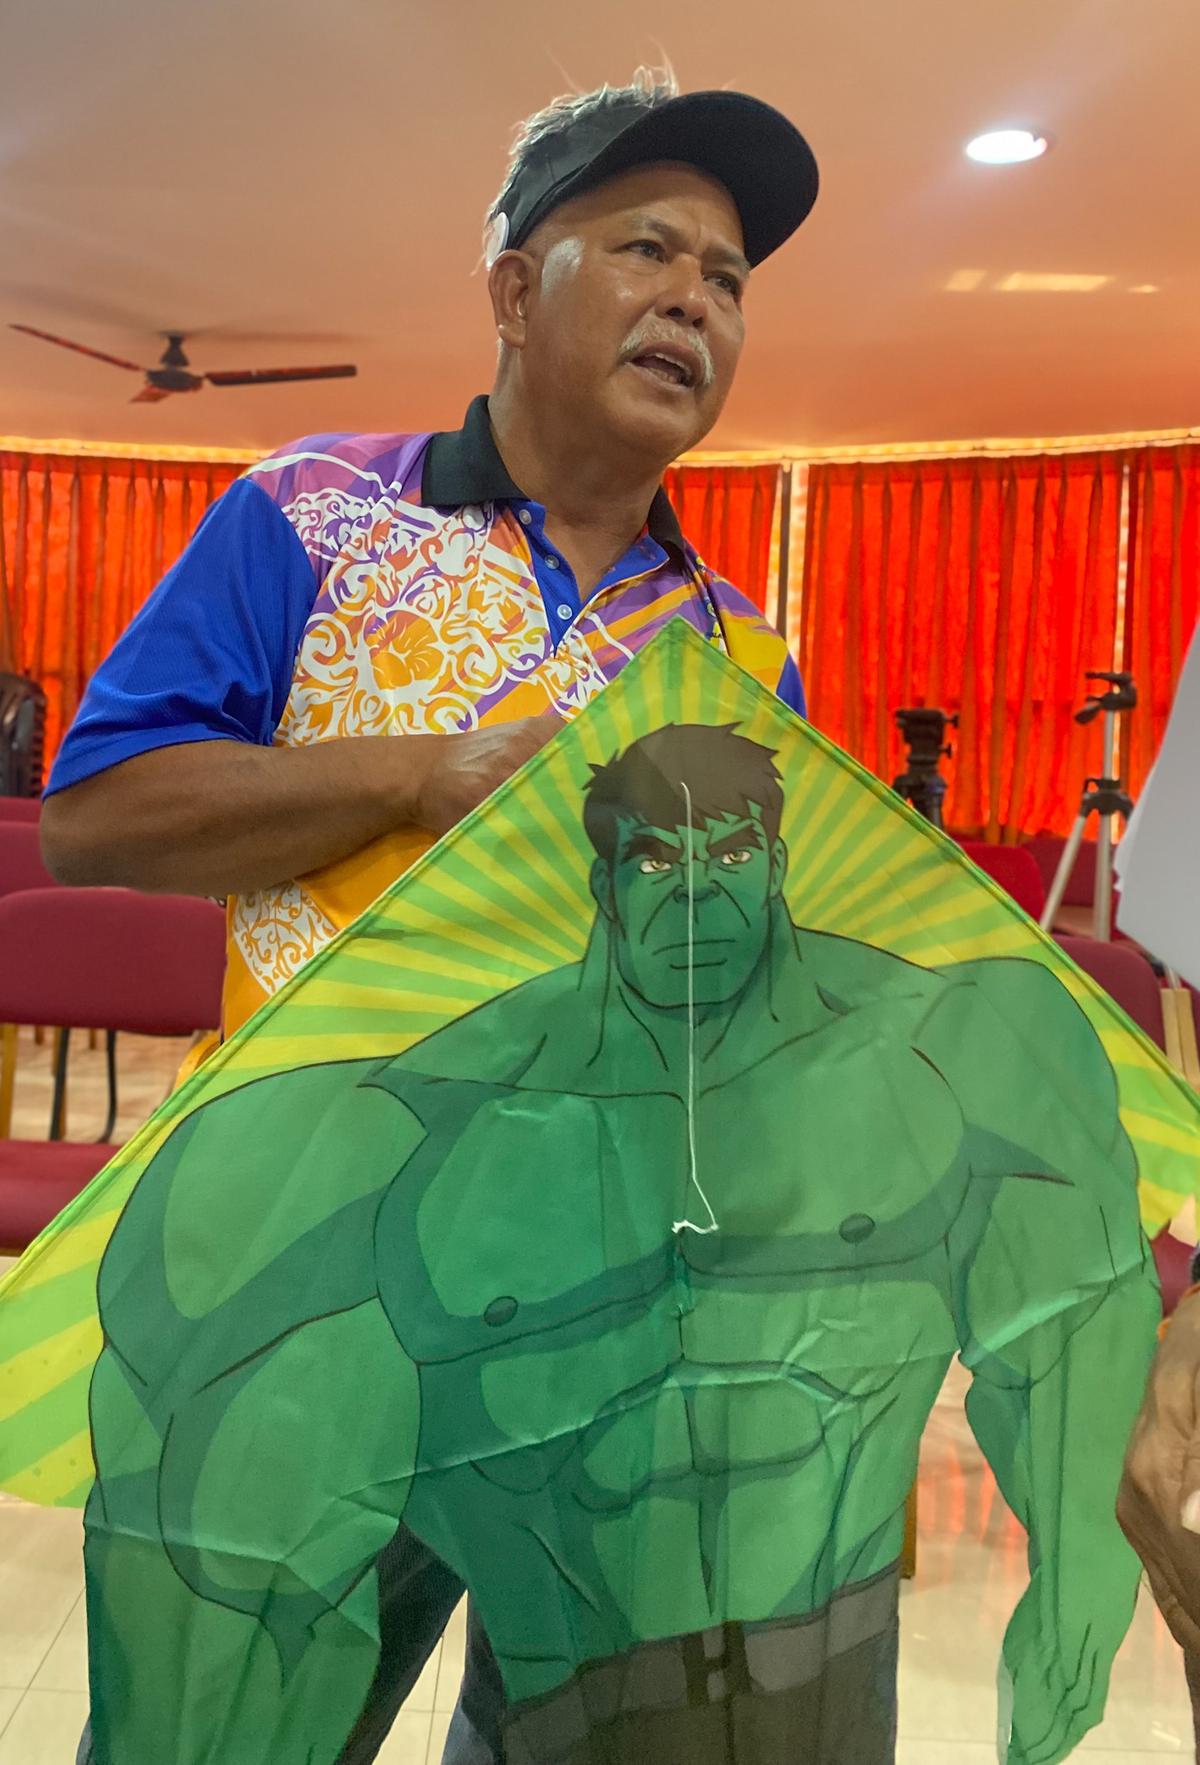 Police officer Fadzil Ali from Malaysia will be flying an Incredible Hulk and five other kites made of reflective material at the two-day ONGC MRPL International Kite Festival.